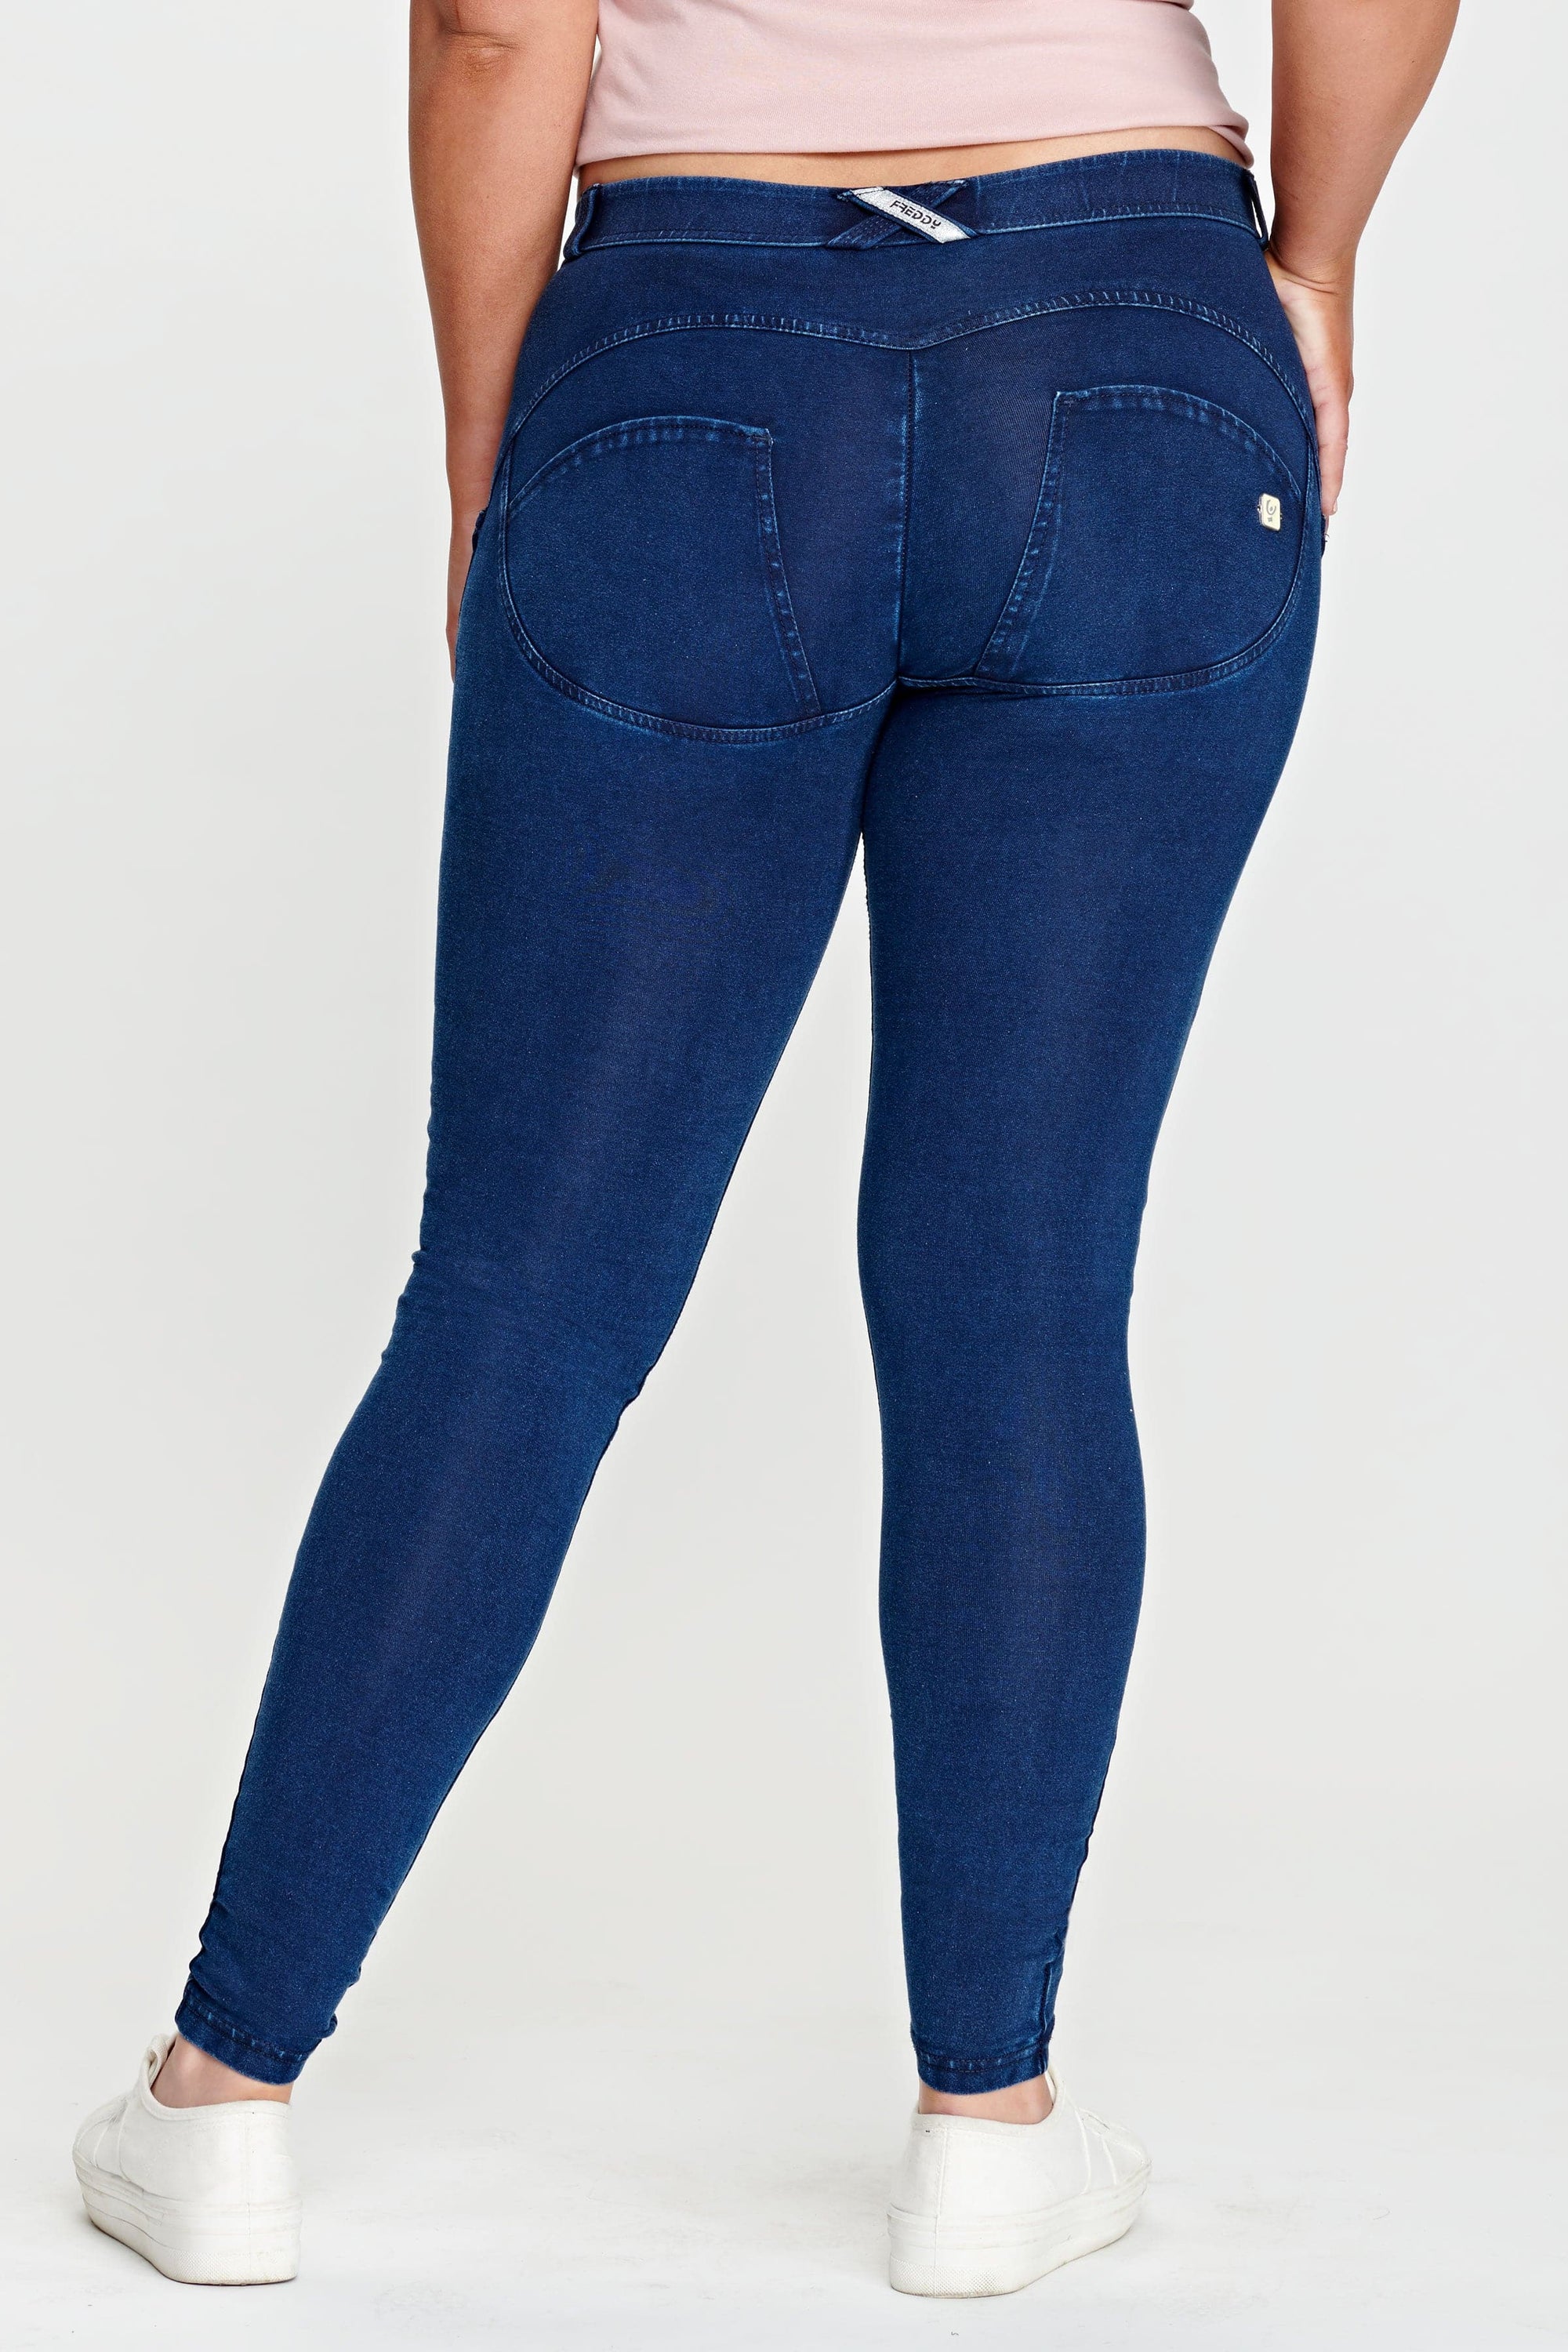 Blue Freddy Jeans Dark Blue WR.UP + rise, mid Stitching, Length Full